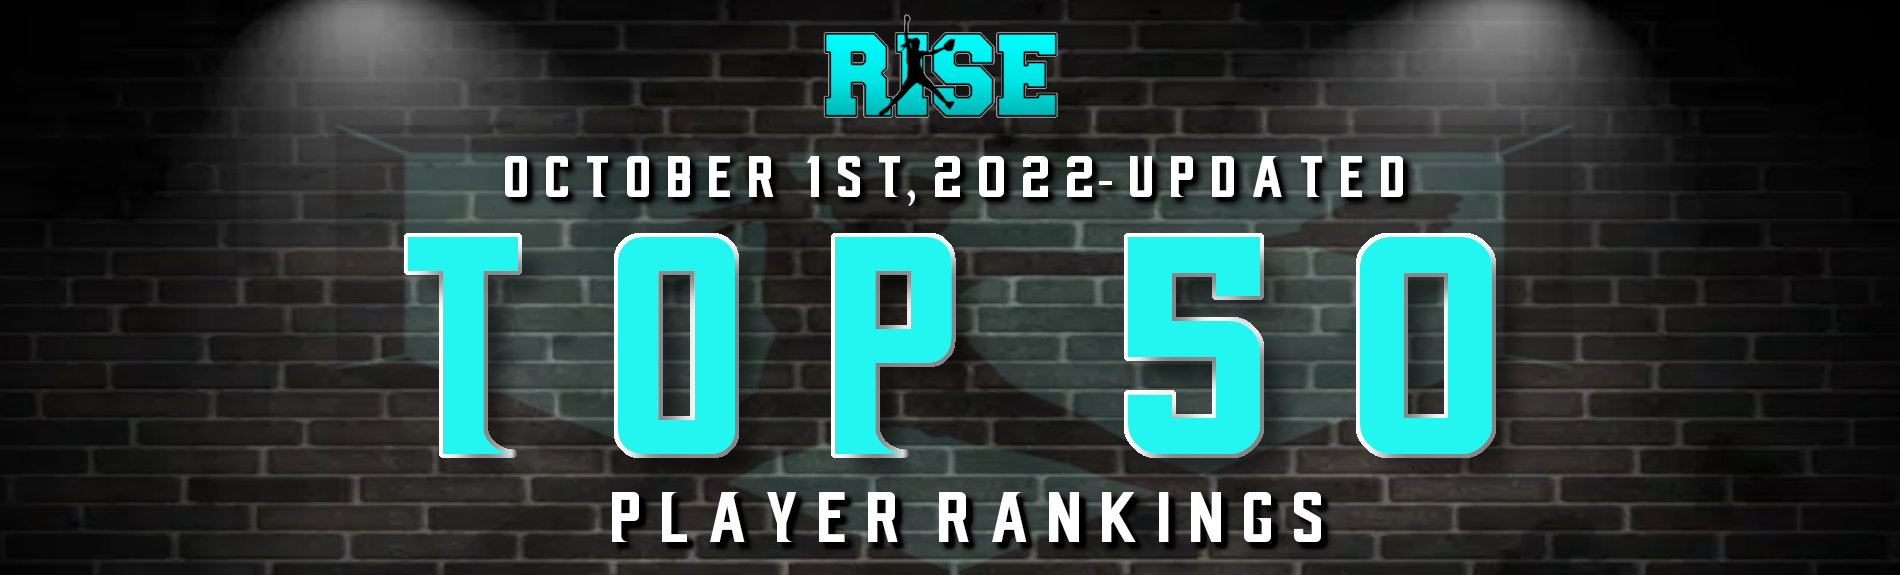 RISE “Top 50” UPDATED Player Rankings-(October 1st, 2022)